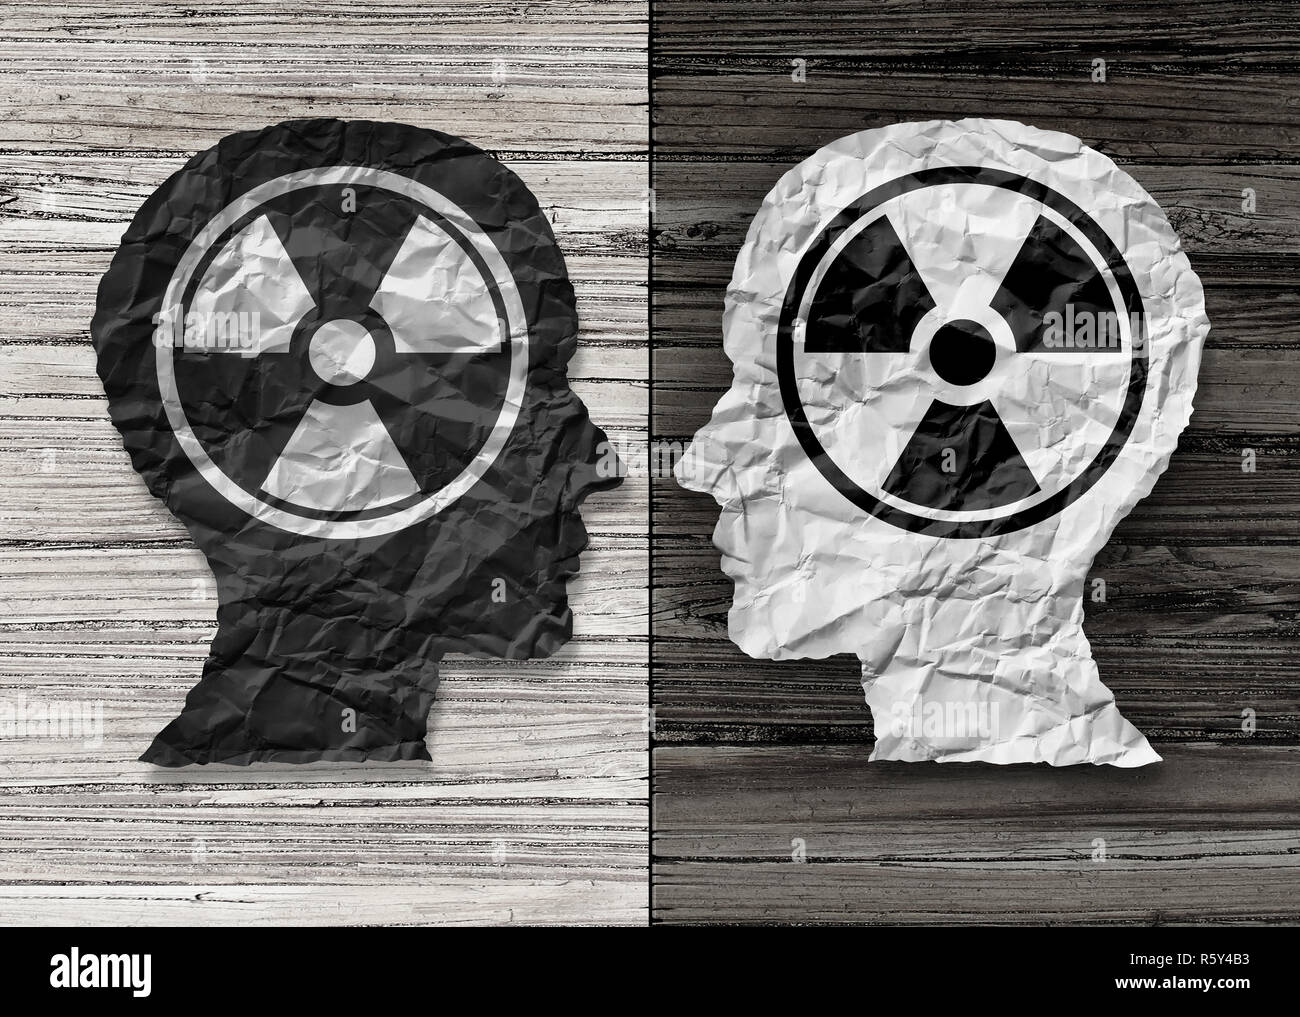 Toxic people psychology concept as a human head in paper divided in two colors as a psychological metaphor for bad social behavior challenges. Stock Photo